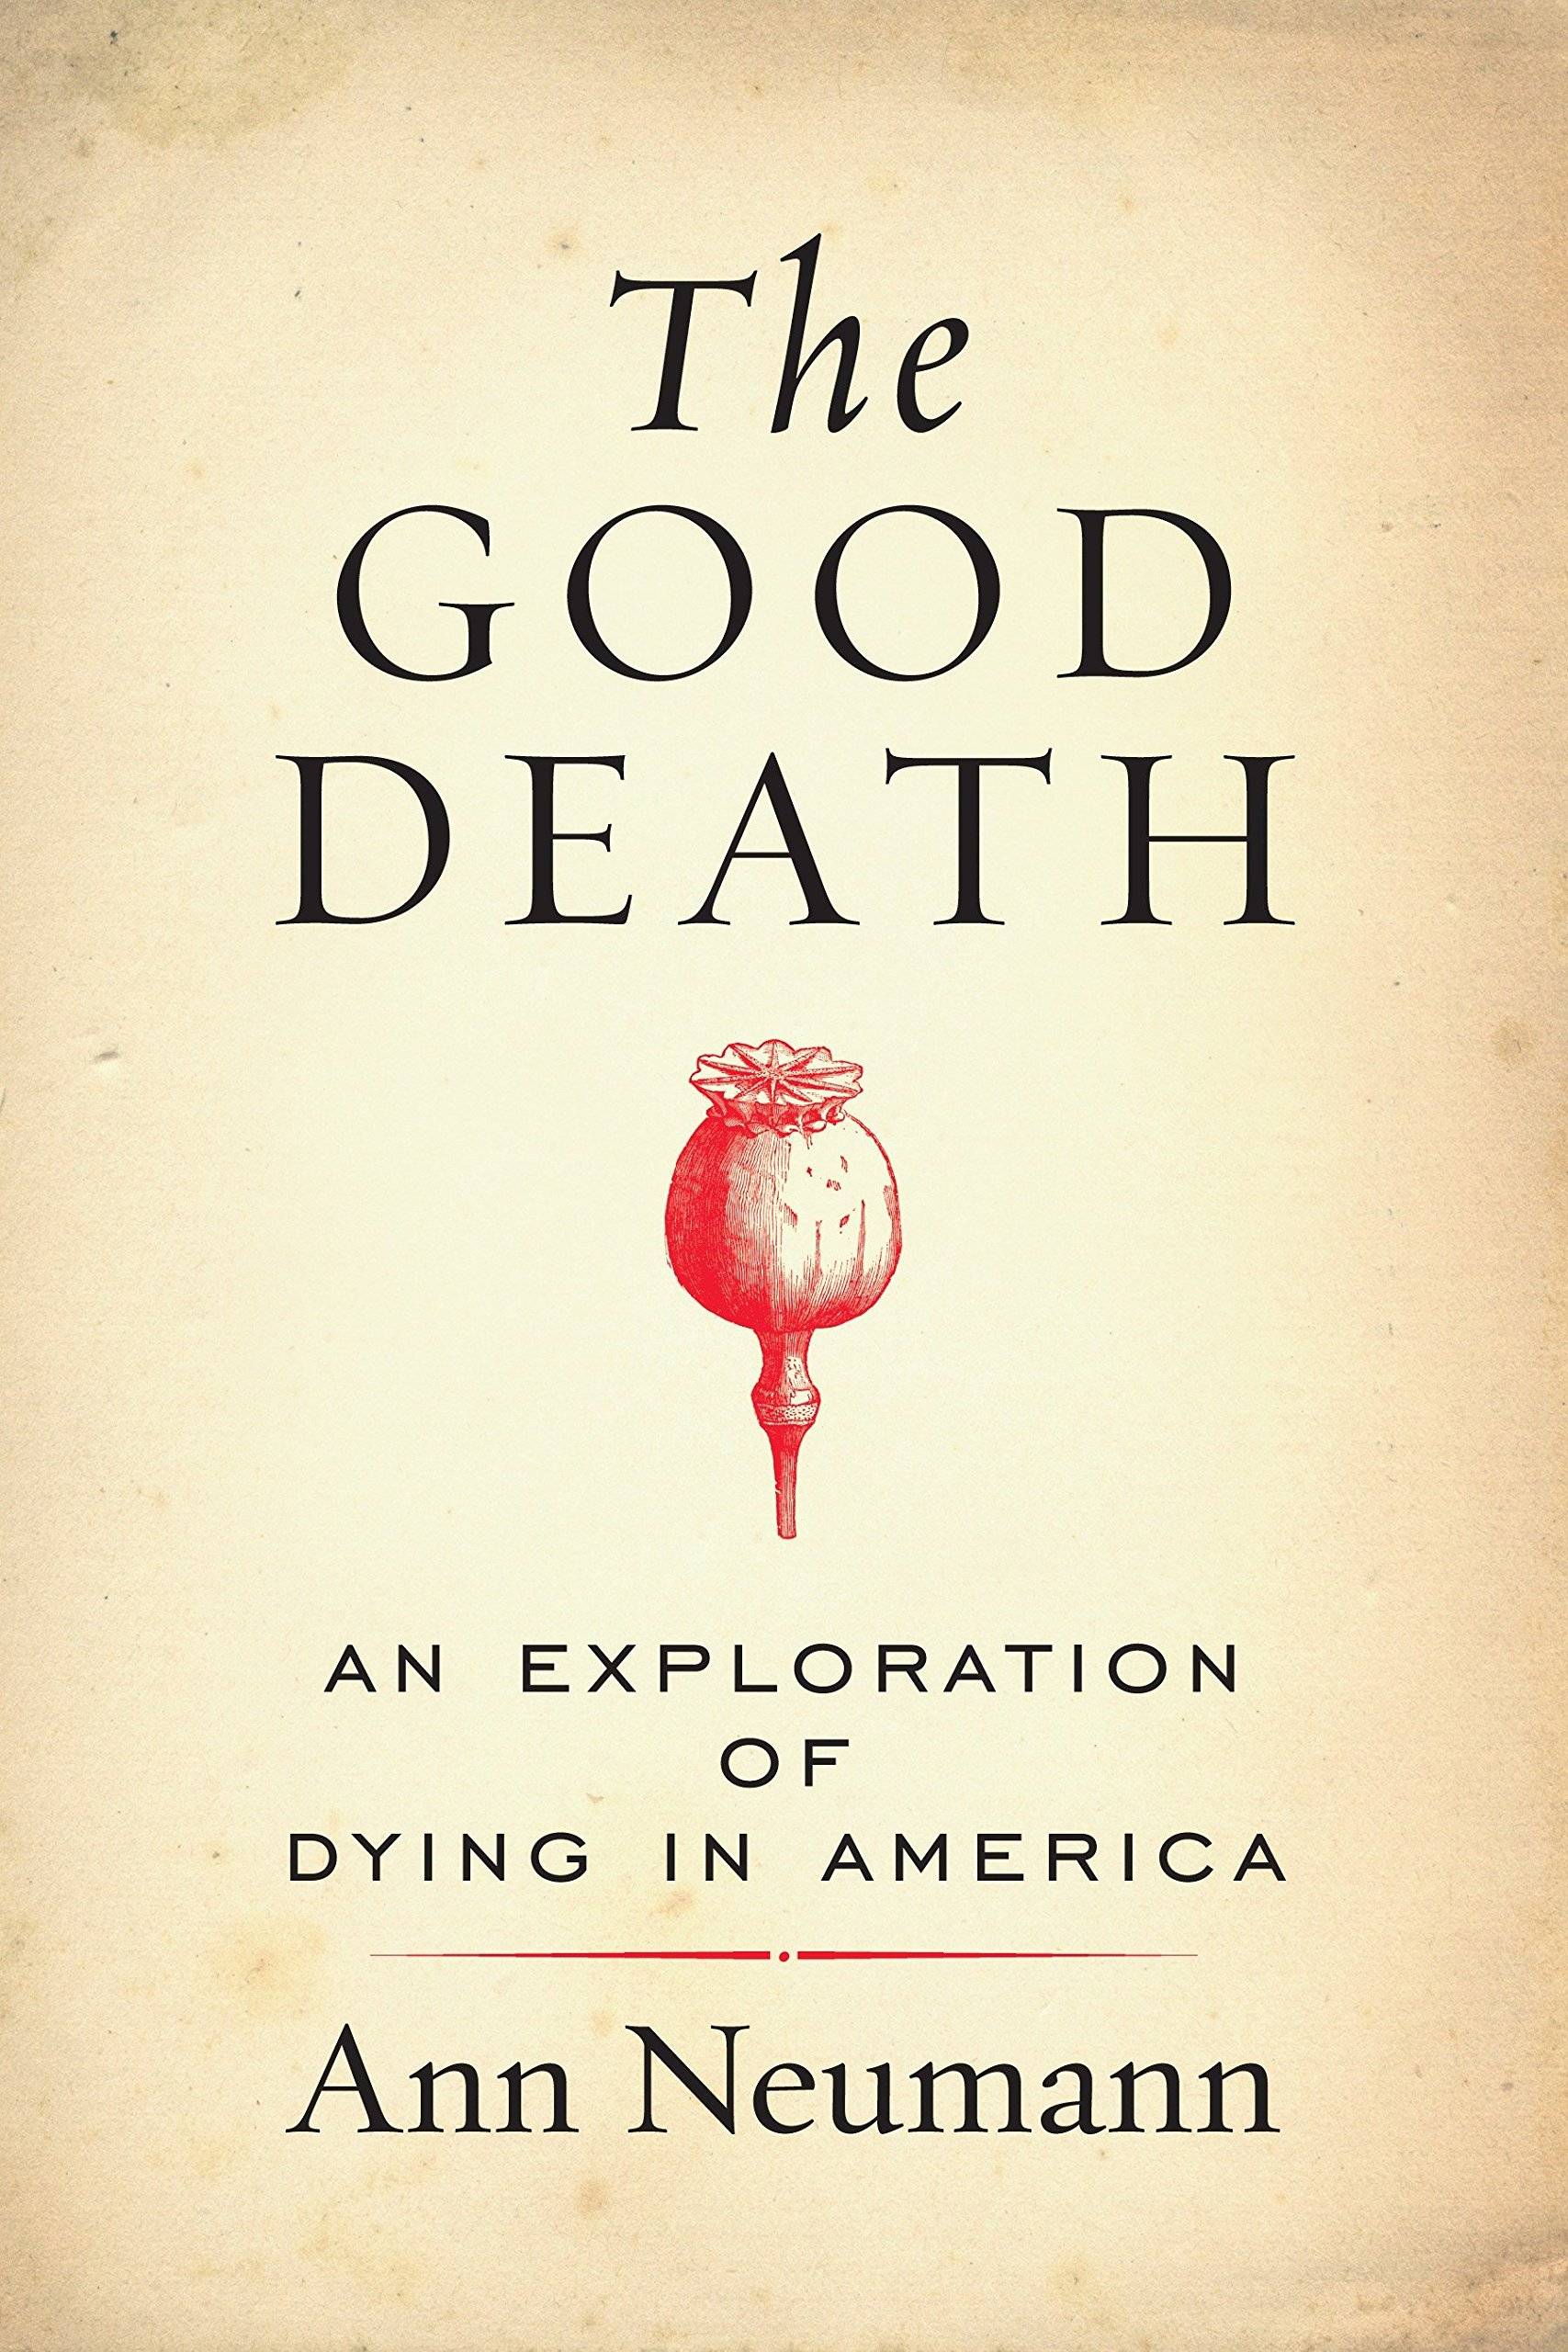 The good death : an exploration of dying in America by Ann Neumann